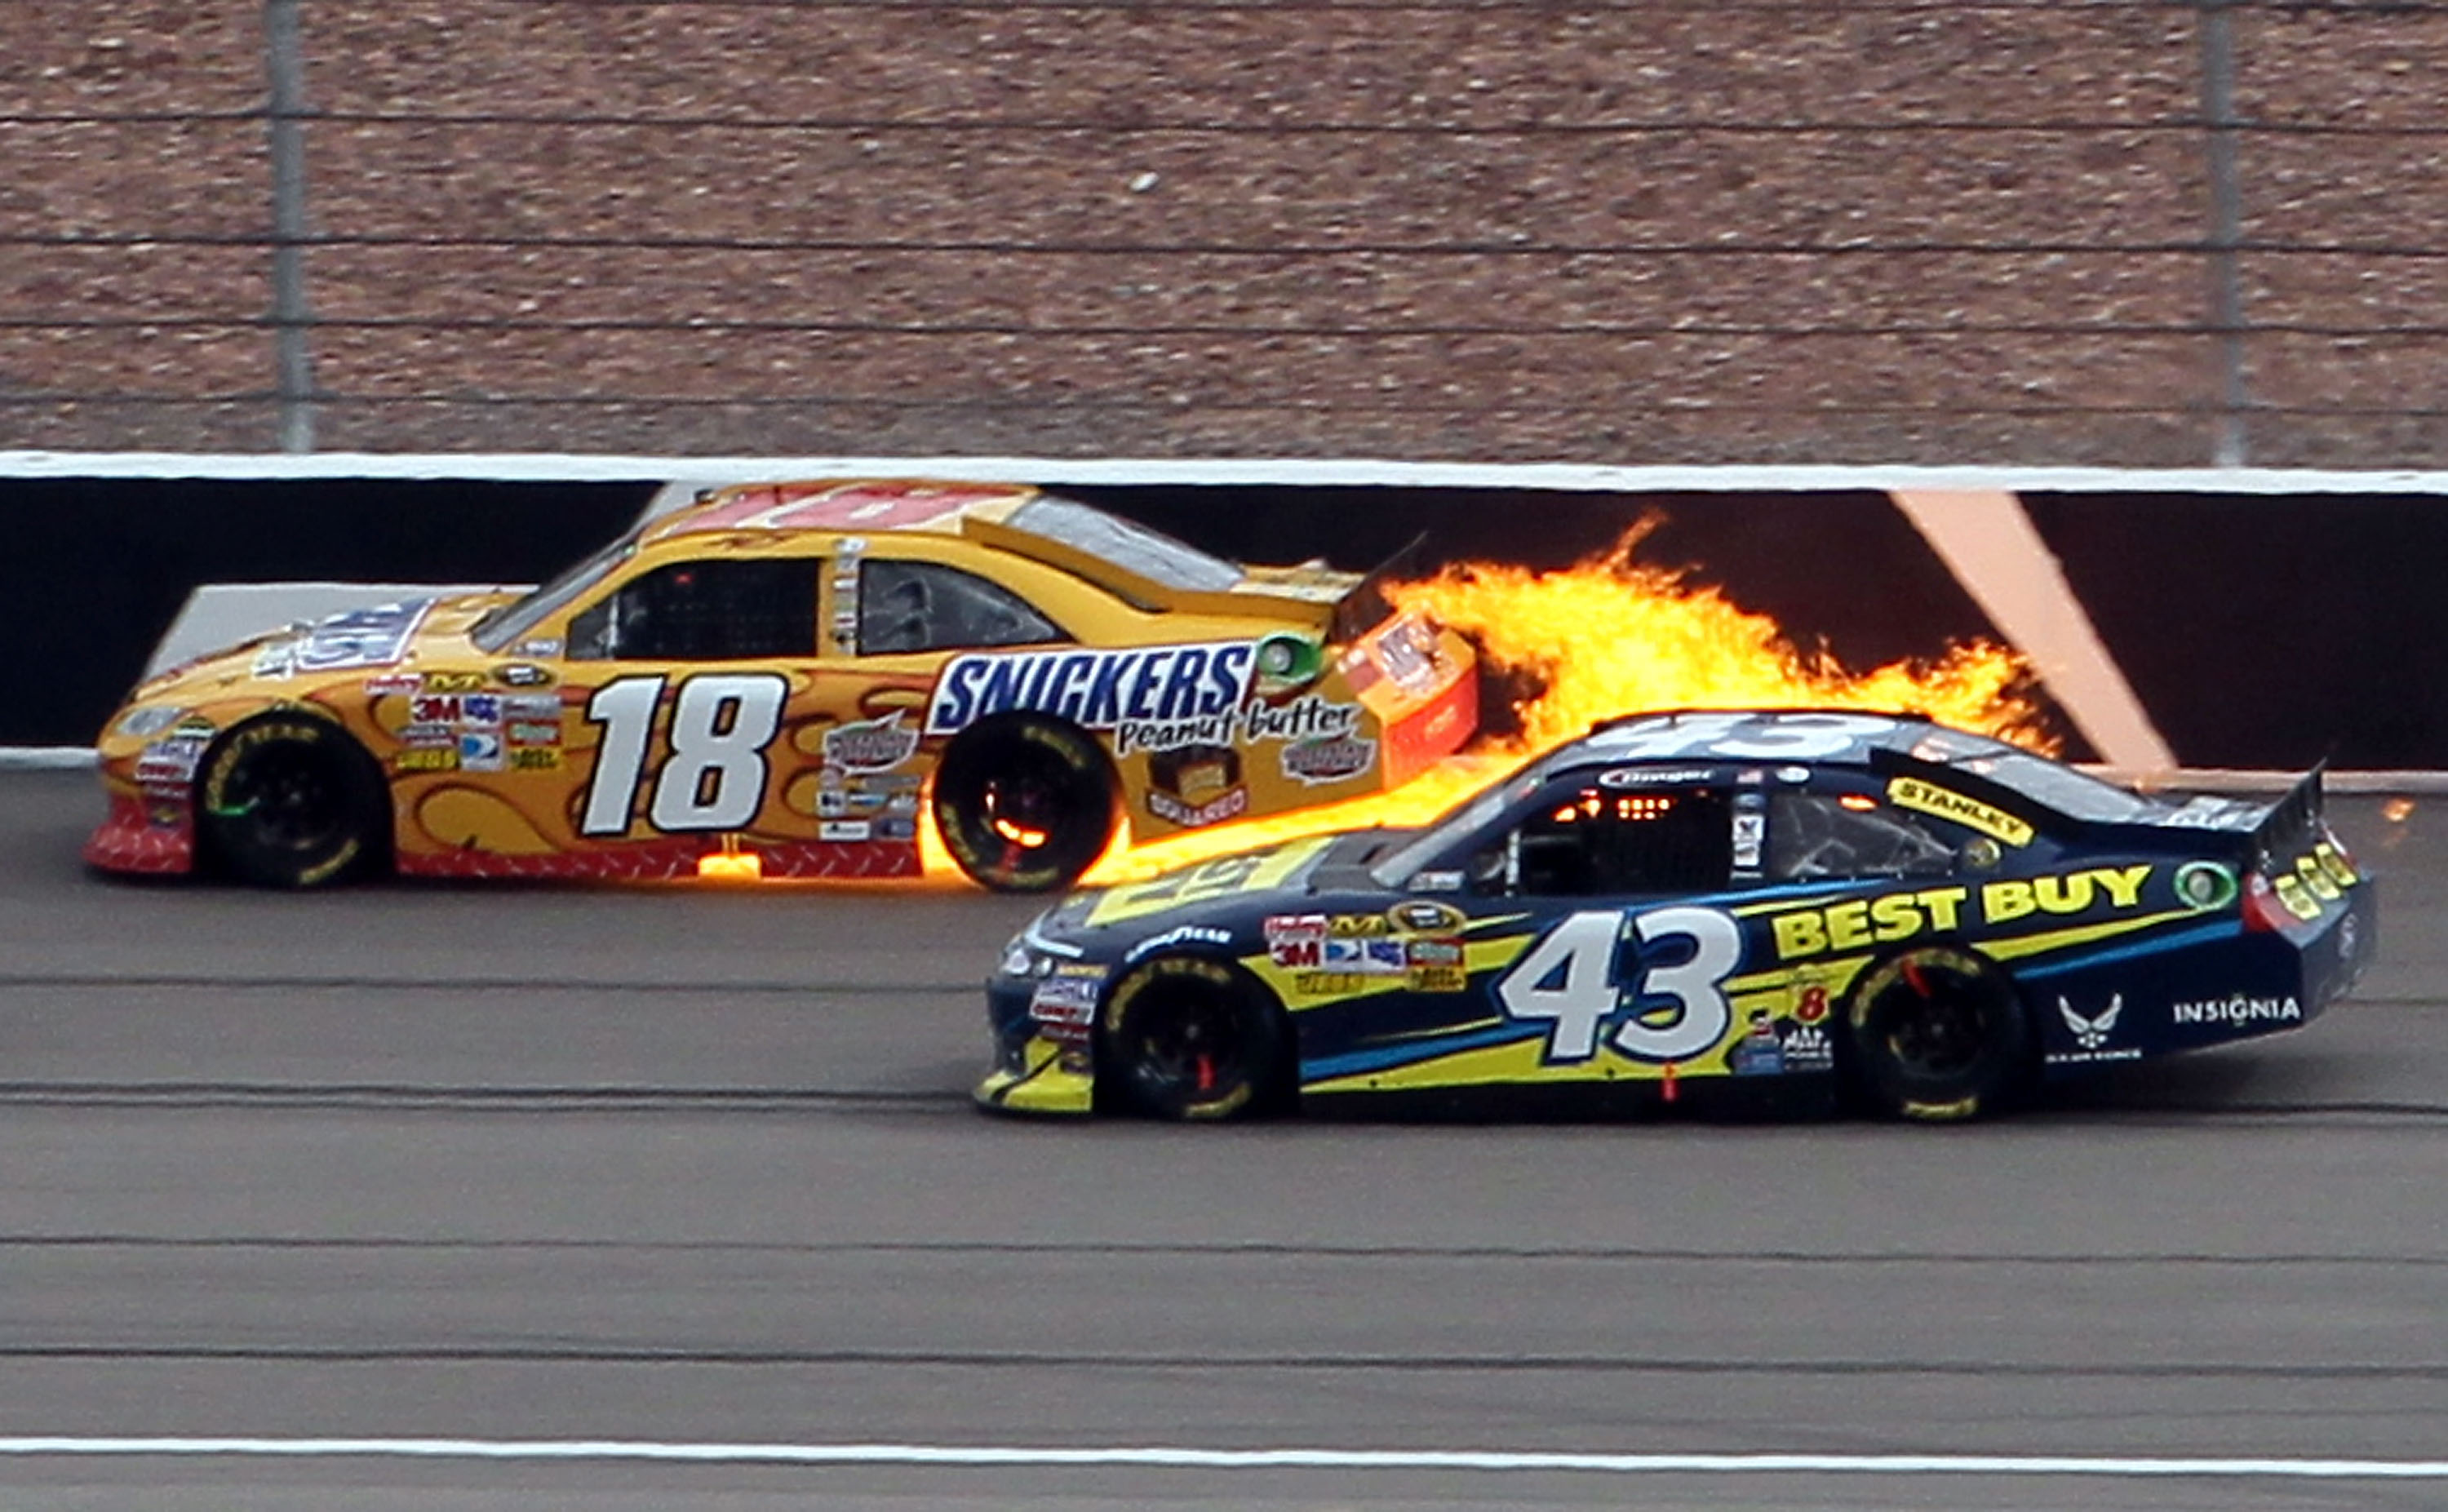 Kyle Busch's driving style is often "checkers or wreckers".